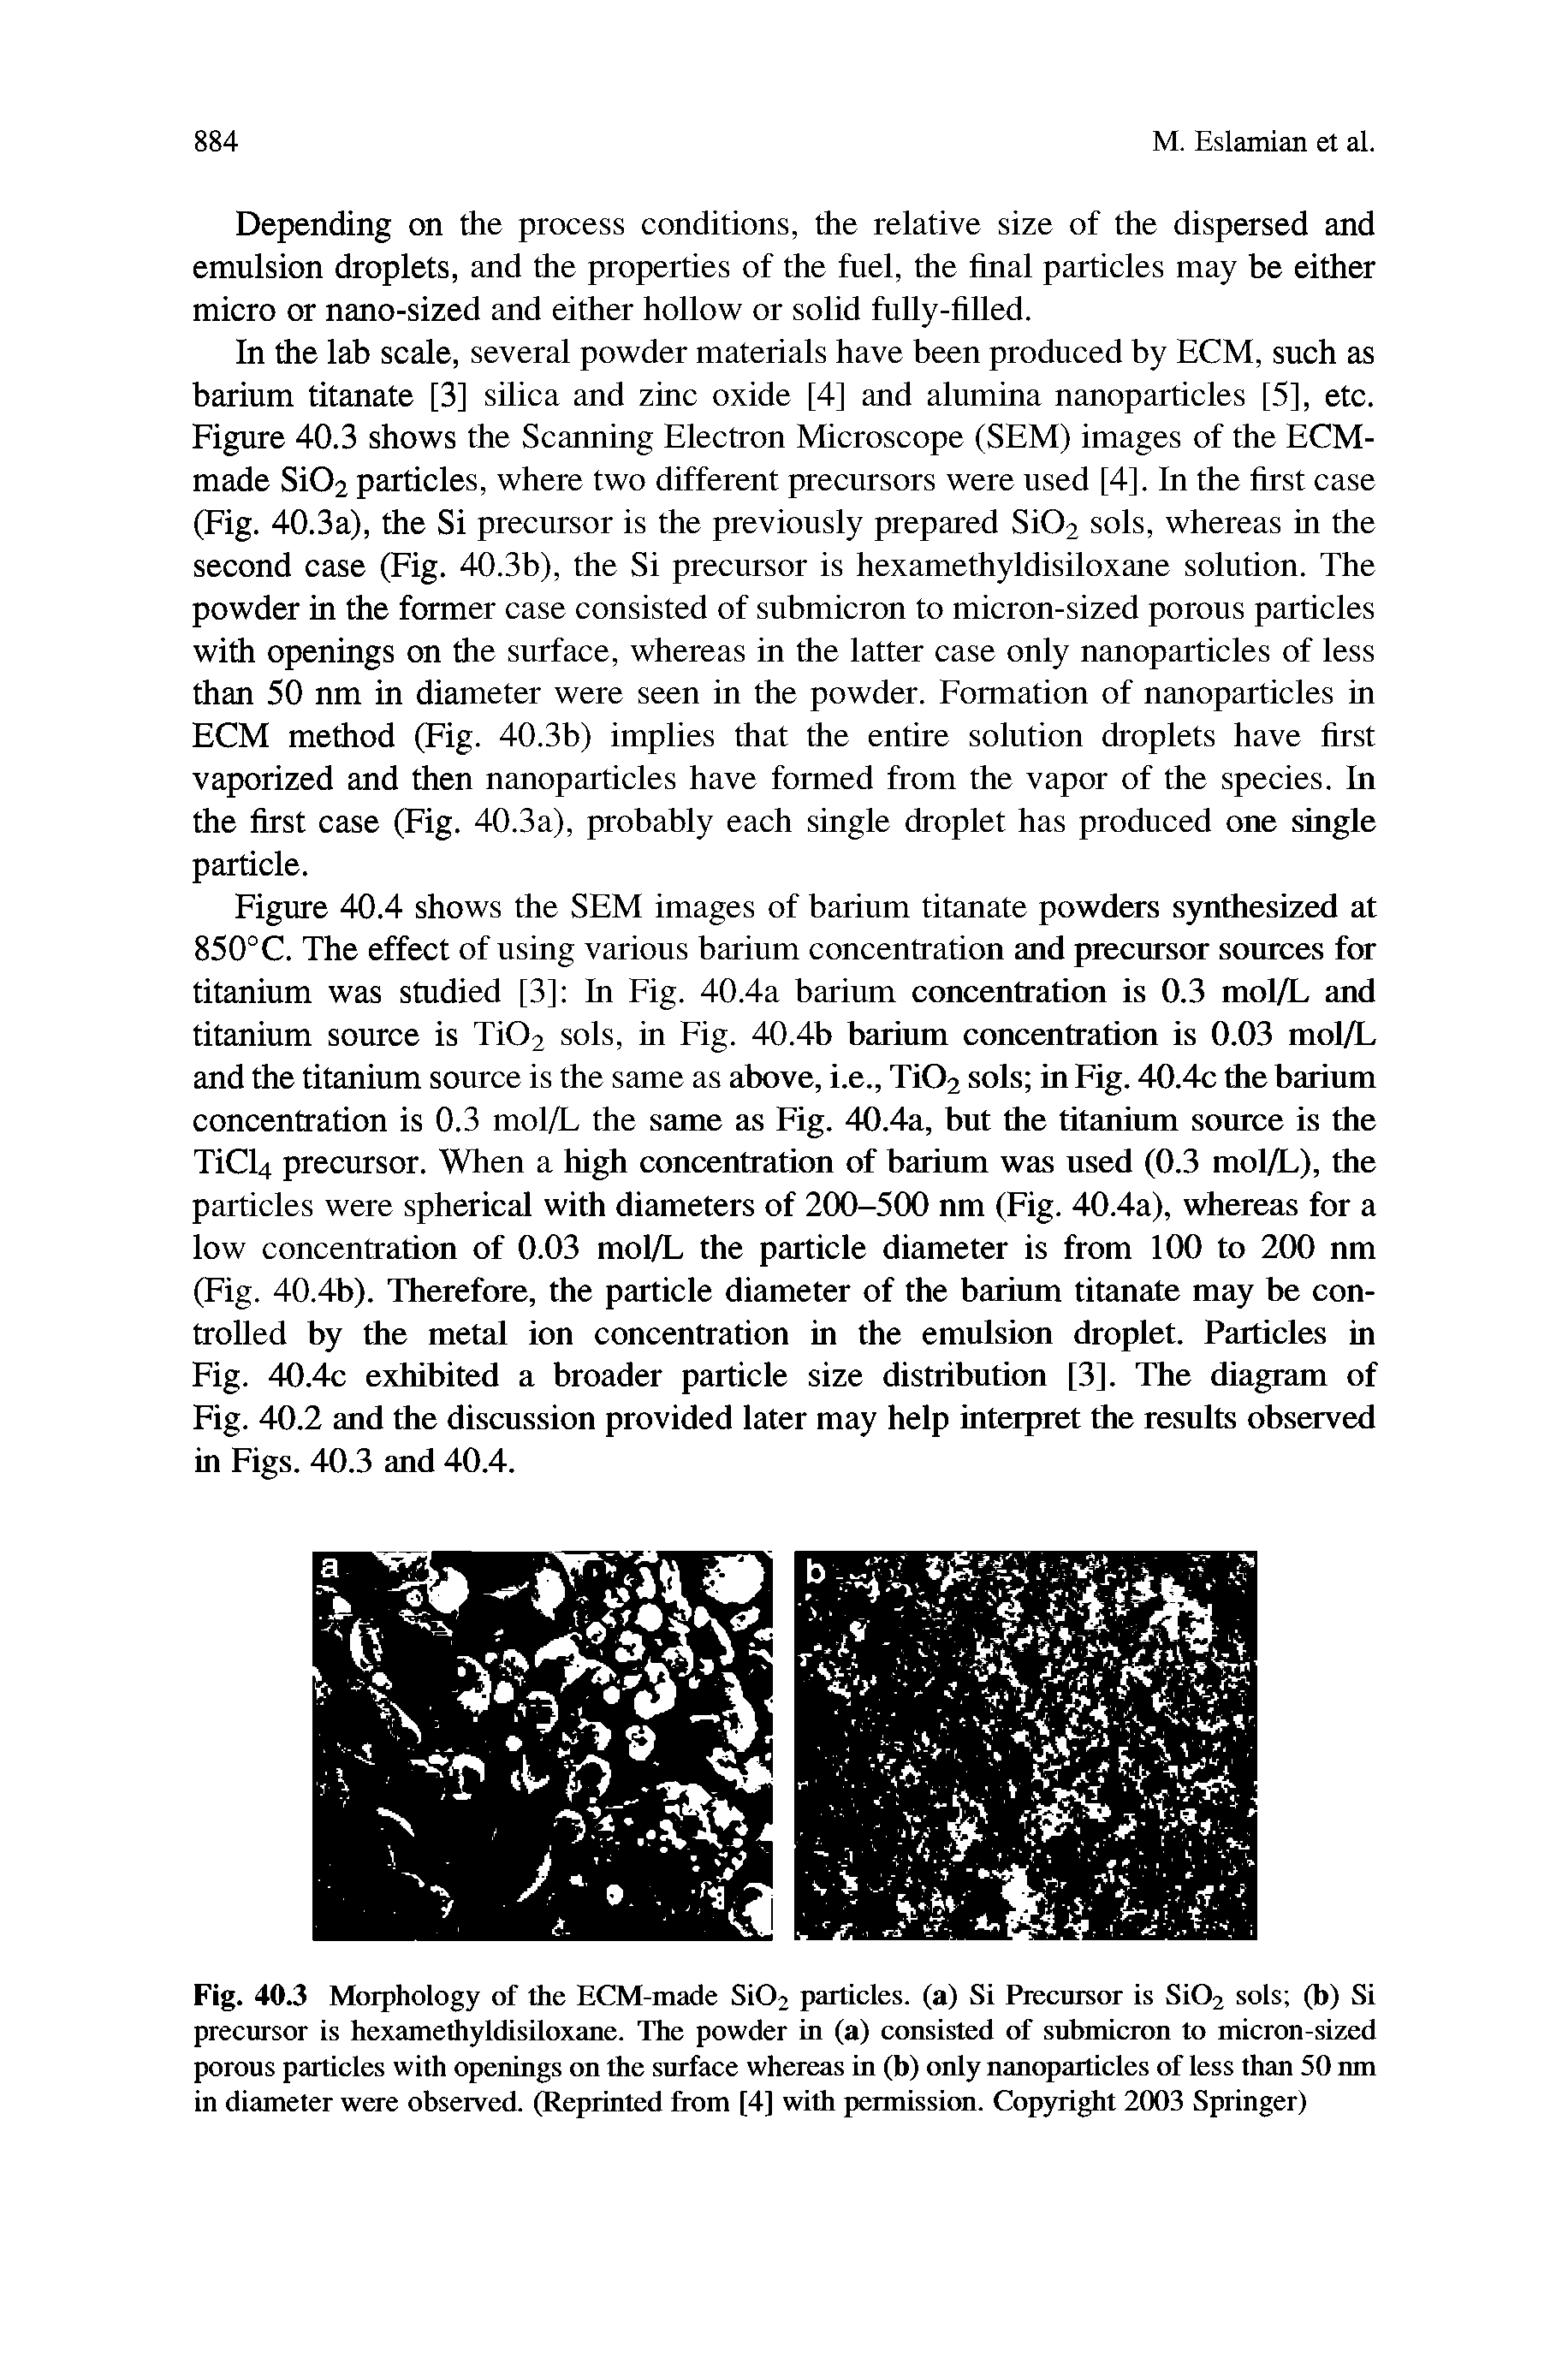 Figure 40.4 shows the SEM images of barium titanate powders synthesized at 850°C. The effect of using various barium concentration and precursor sources for titanium was studied [3] In Fig. 40.4a barium concentration is 0.3 mol/L and titanium source is Ti02 sols, in Fig. 40.4b barium concentration is 0.03 mol/L and the titanium source is the same as above, i.e., Ti02 sols in Fig. 40.4c the barium concentration is 0.3 mol/L the same as Fig. 40.4a, but the titanium source is the TiCl4 precursor. When a high concentration of barium was used (0.3 mol/L), the particles were spherical with diameters of 200-500 nm (Fig. 40.4a), whereas for a low concentration of 0.03 mol/L the particle diameter is from 100 to 200 nm (Fig. 40.4b). Therefore, the particle diameter of the barium titanate may be controlled by the metal ion concentration in the emulsion droplet. Particles in Fig. 40.4c exhibited a broader particle size distribution [3]. The diagram of Fig. 40.2 and the discussion provided later may help interpret the results observed in Figs. 40.3 and 40.4.